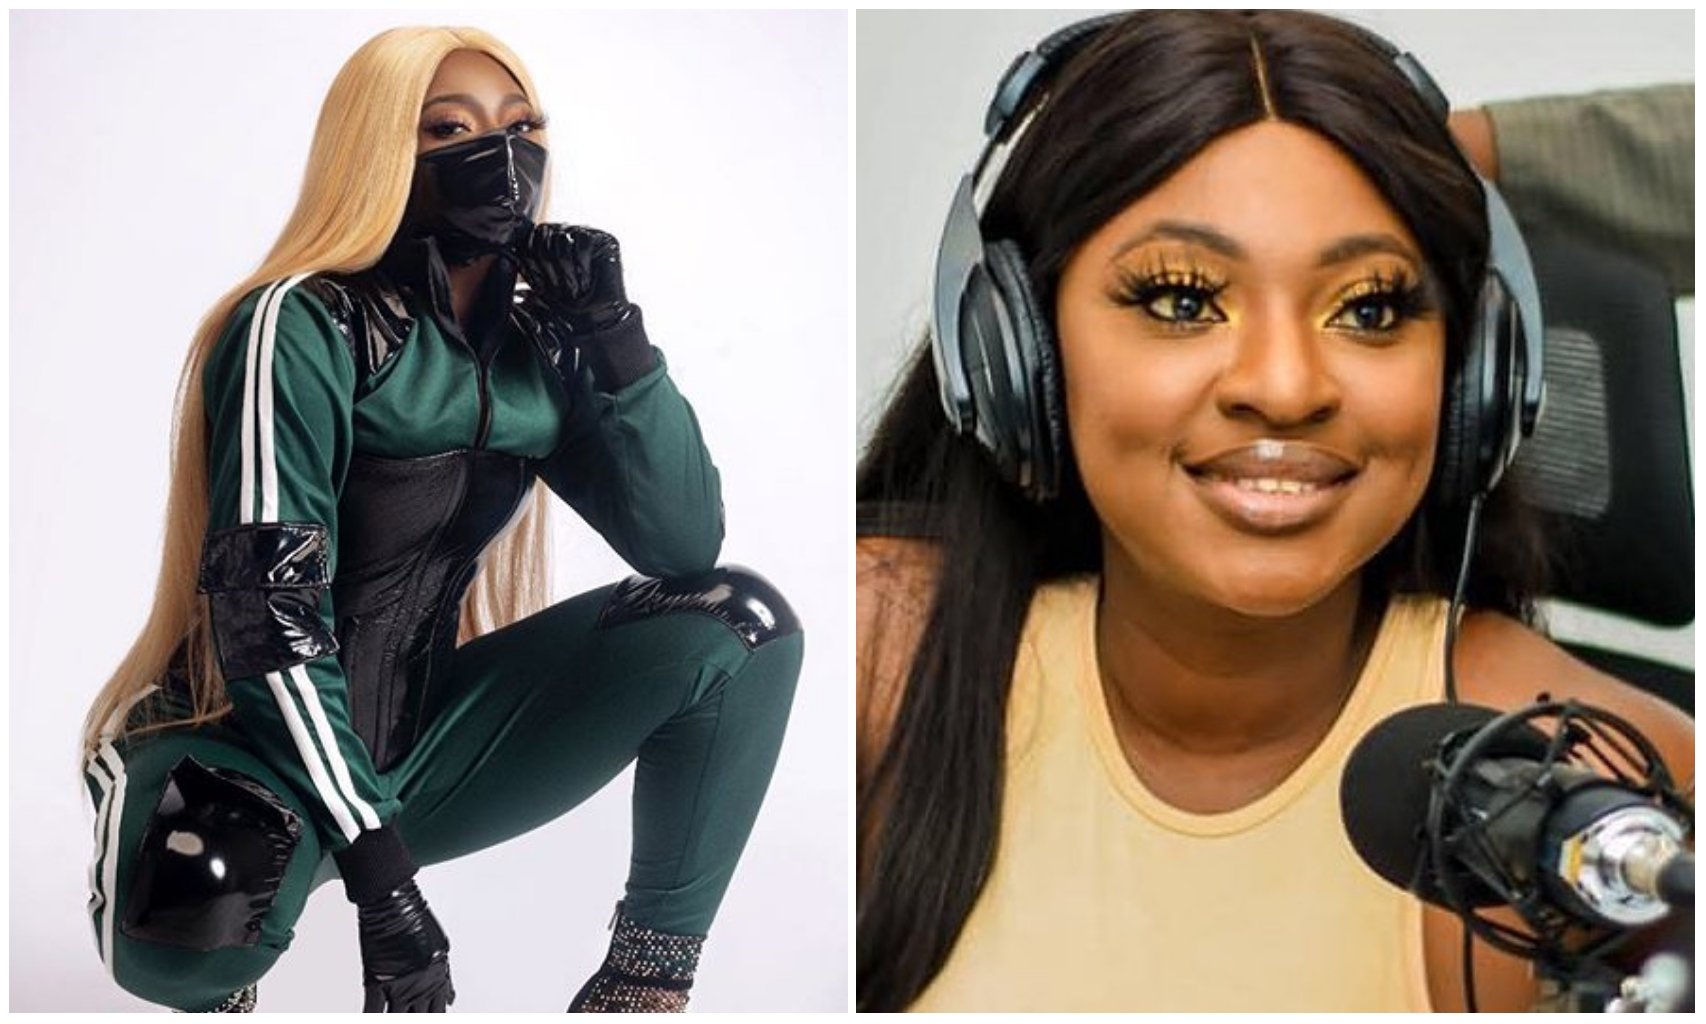 'Love yourself, Don't let people lifestyle intimidate you' – Yvonne Jegede motivates fans (Photo)